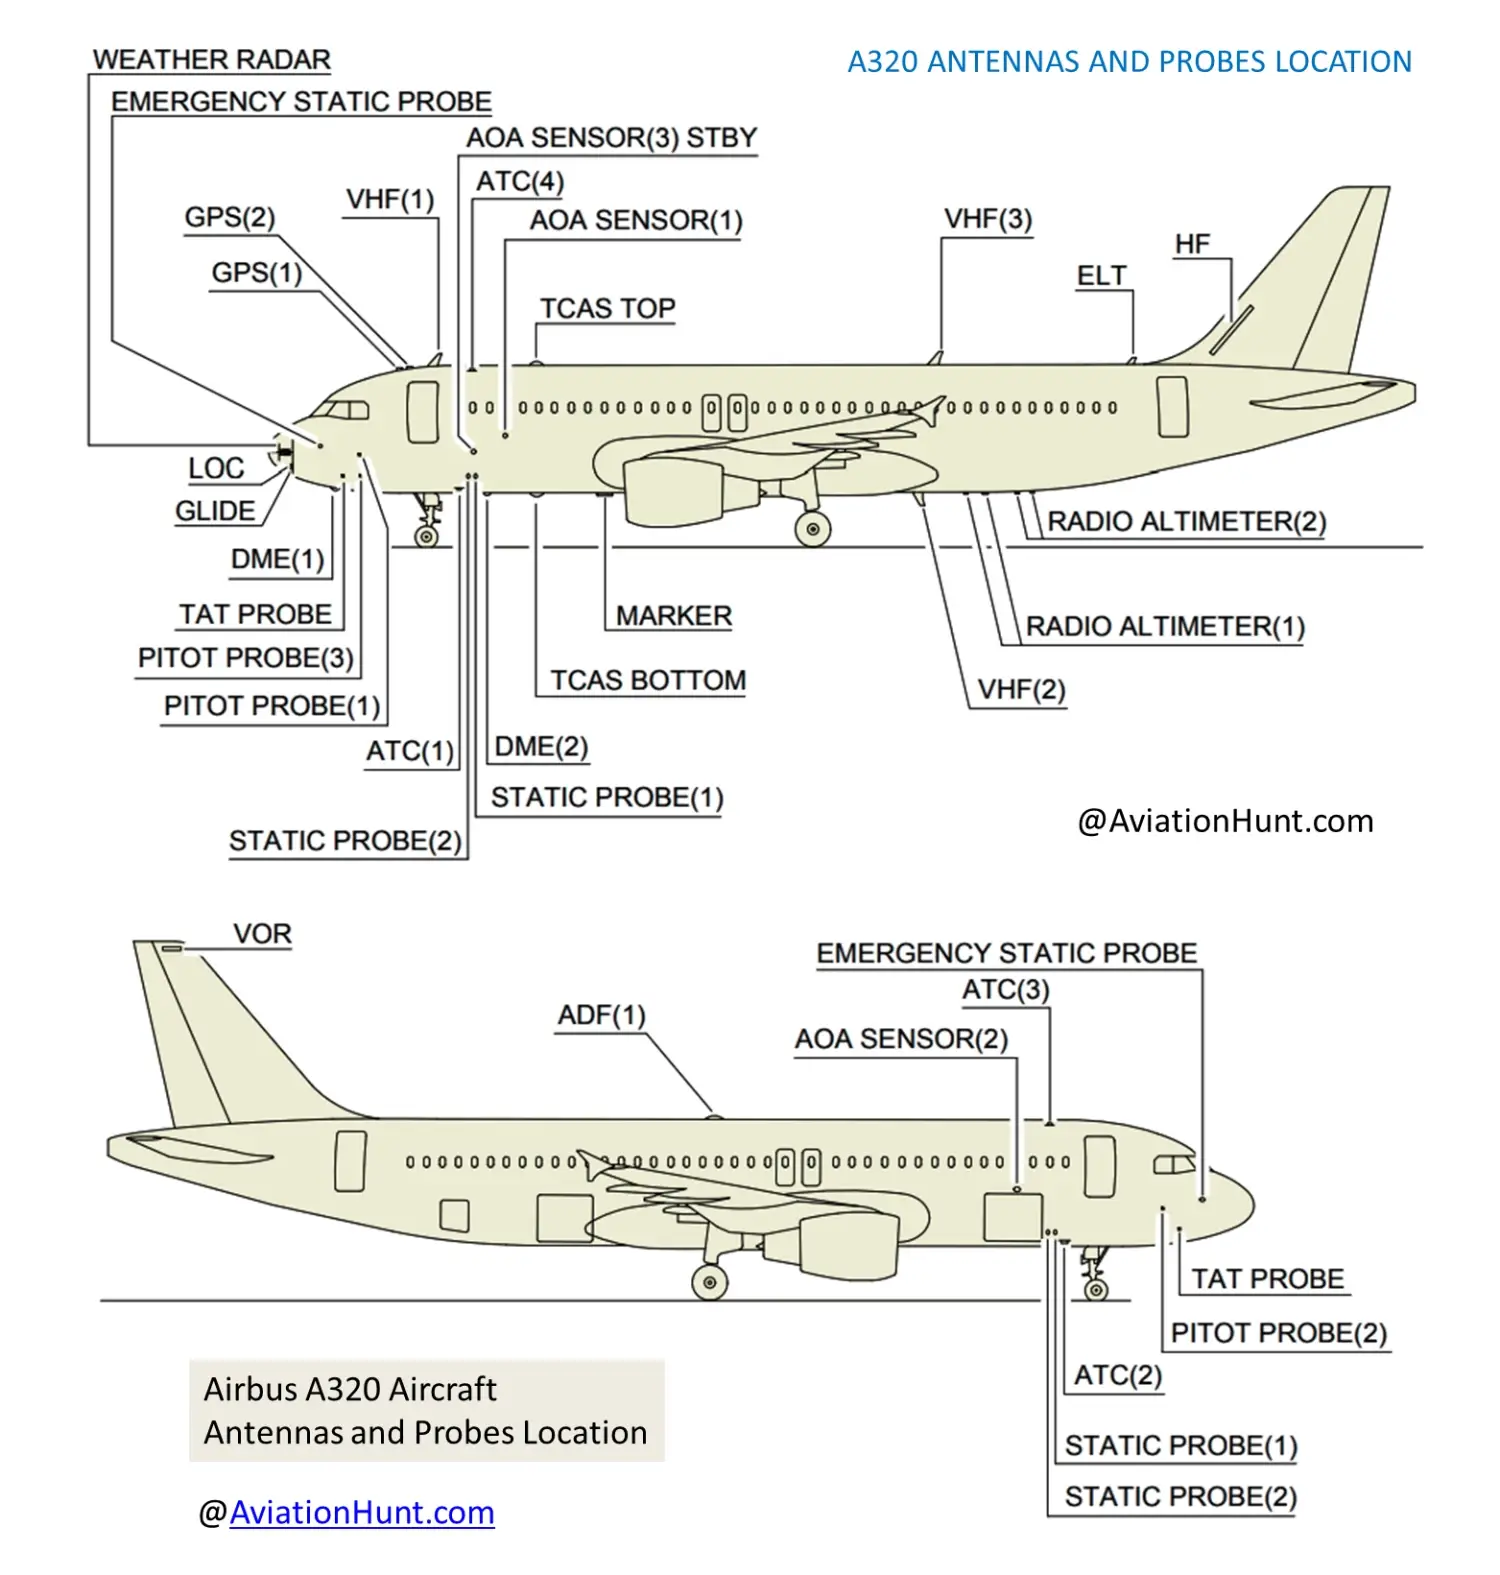 A320 Aircraft Antennas and Probes Location